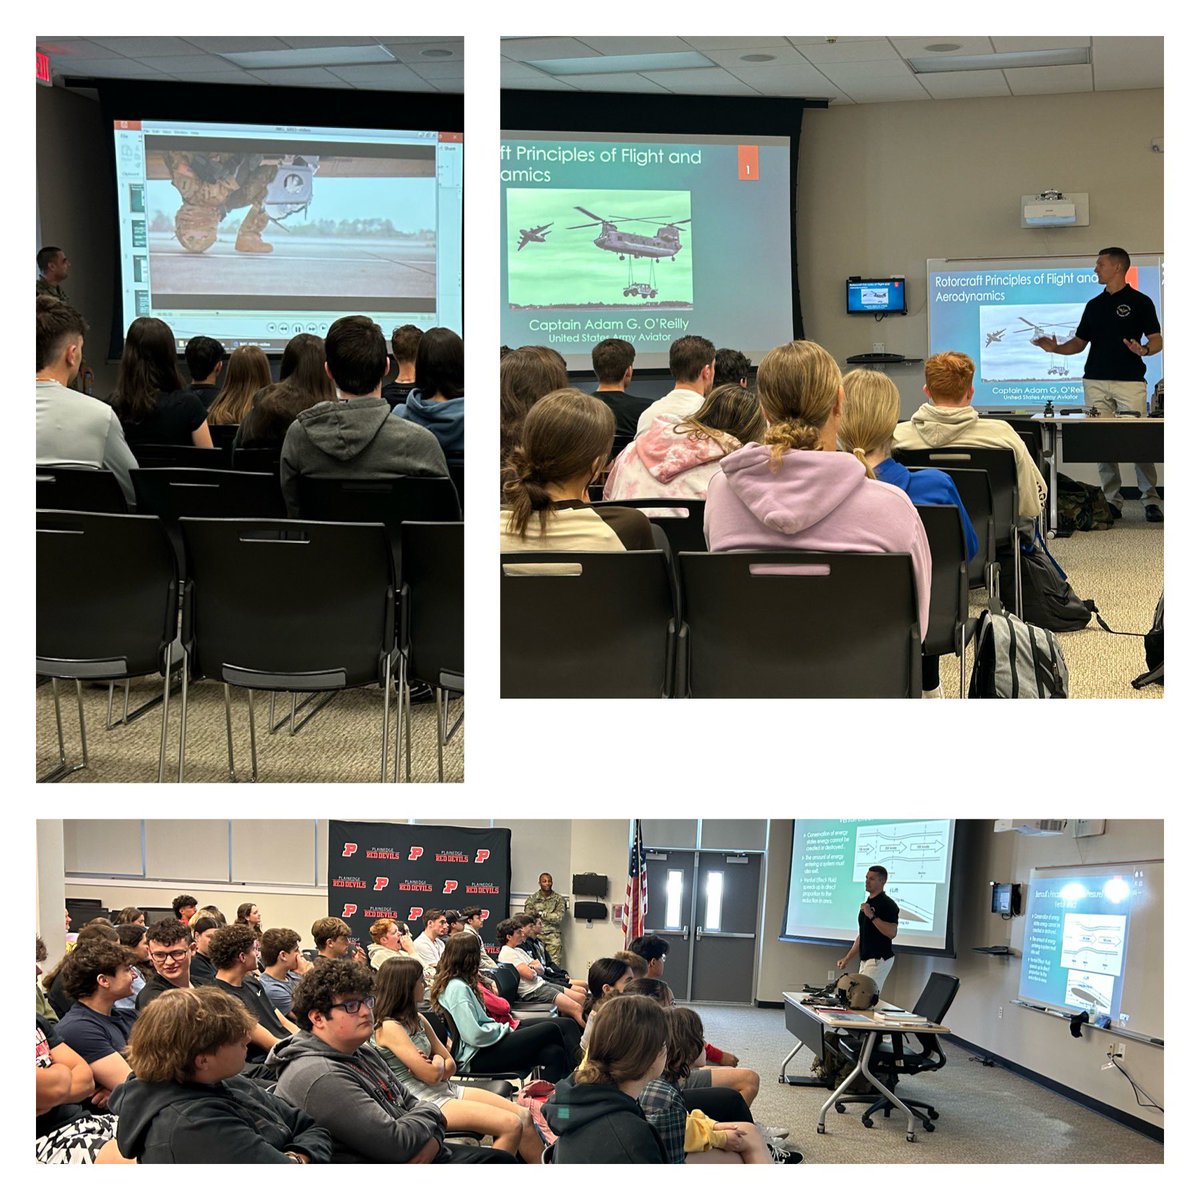 The PHS physics department invited US Army Captain Adam O’Reilly to share his experience as a Chinook Helicopter Pilot to physics and engineering students. He explain the physics involved with operating the helicopter and discussed the Apache helicopter as well.